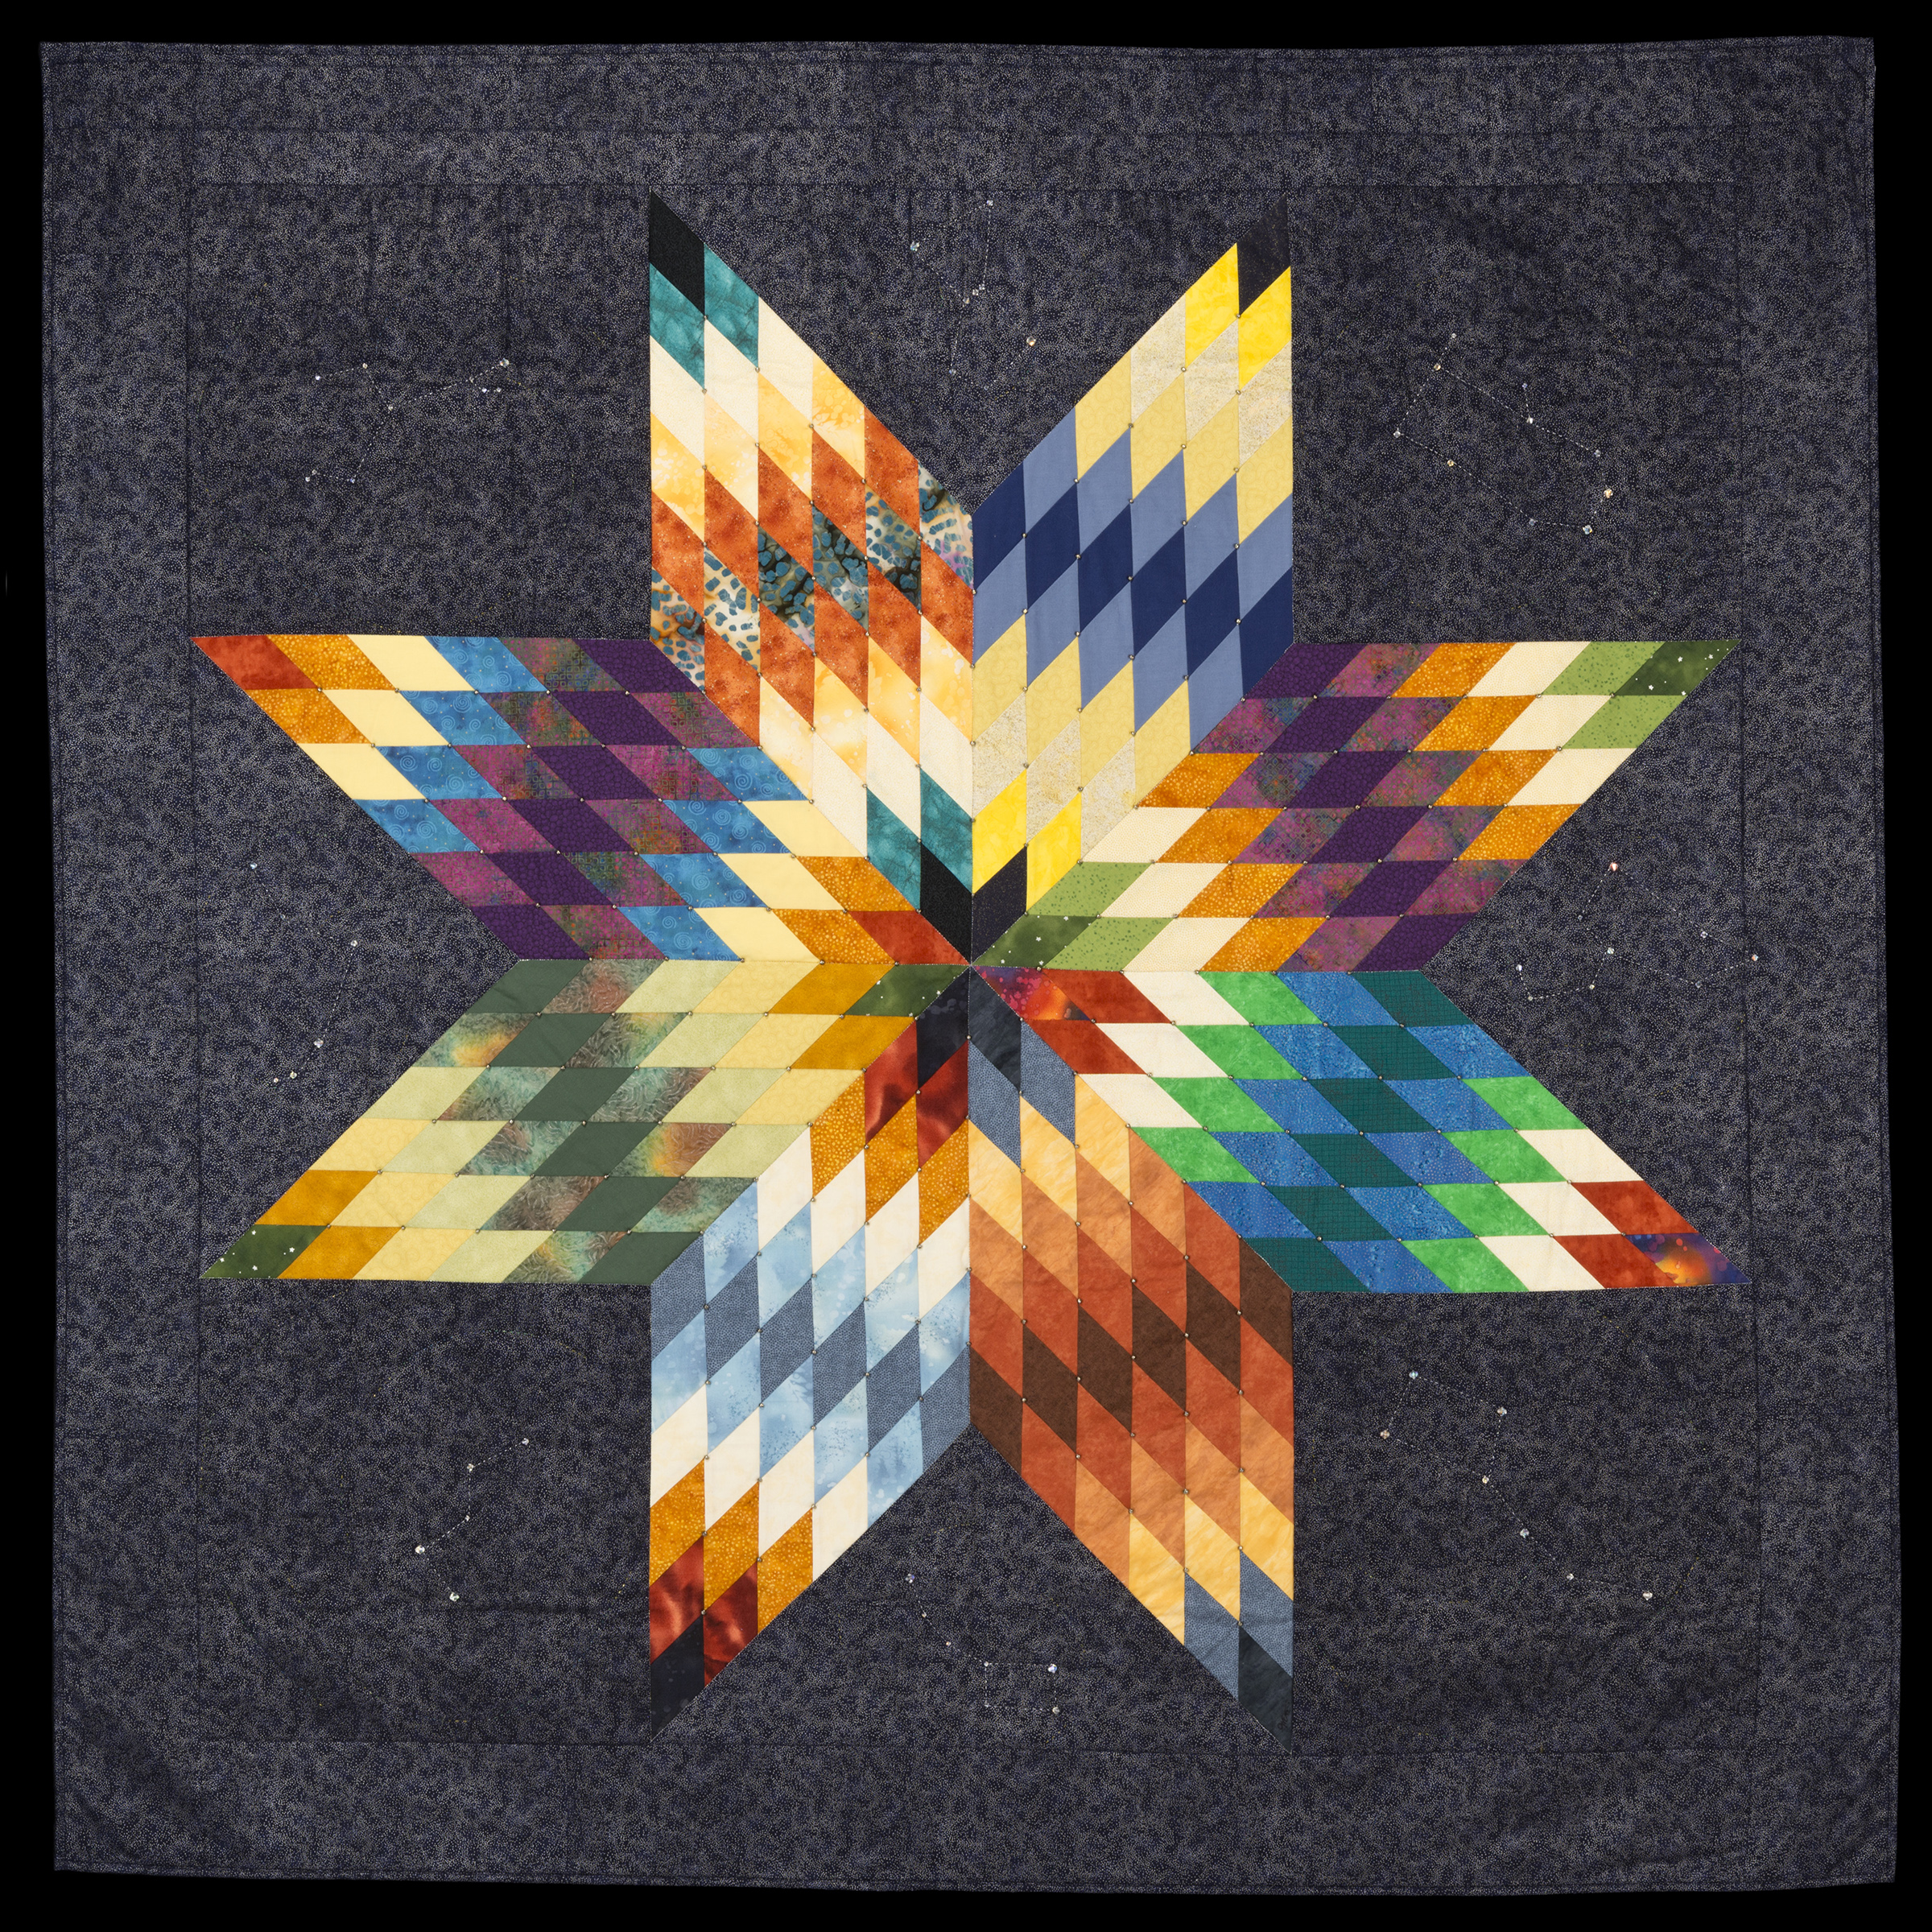 Gwen Westerman quilt at the Minnesota Historical Society